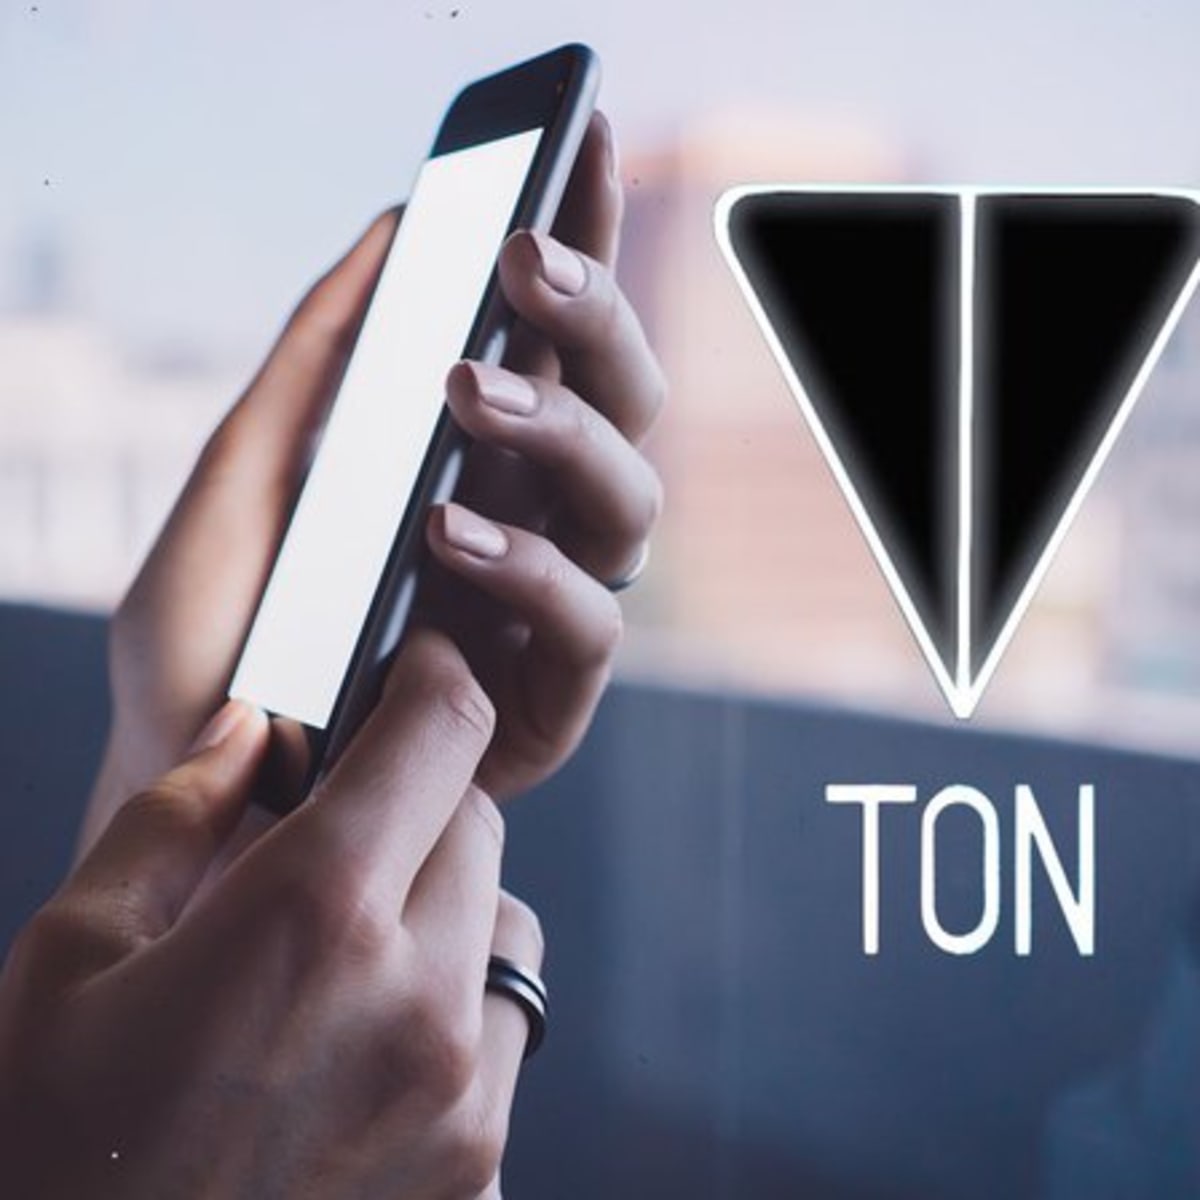 Telegram's Privacy-Focused User Base Could Become TON Blockchain's Killer App - Bitcoin - Bitcoin News, Articles and Insights